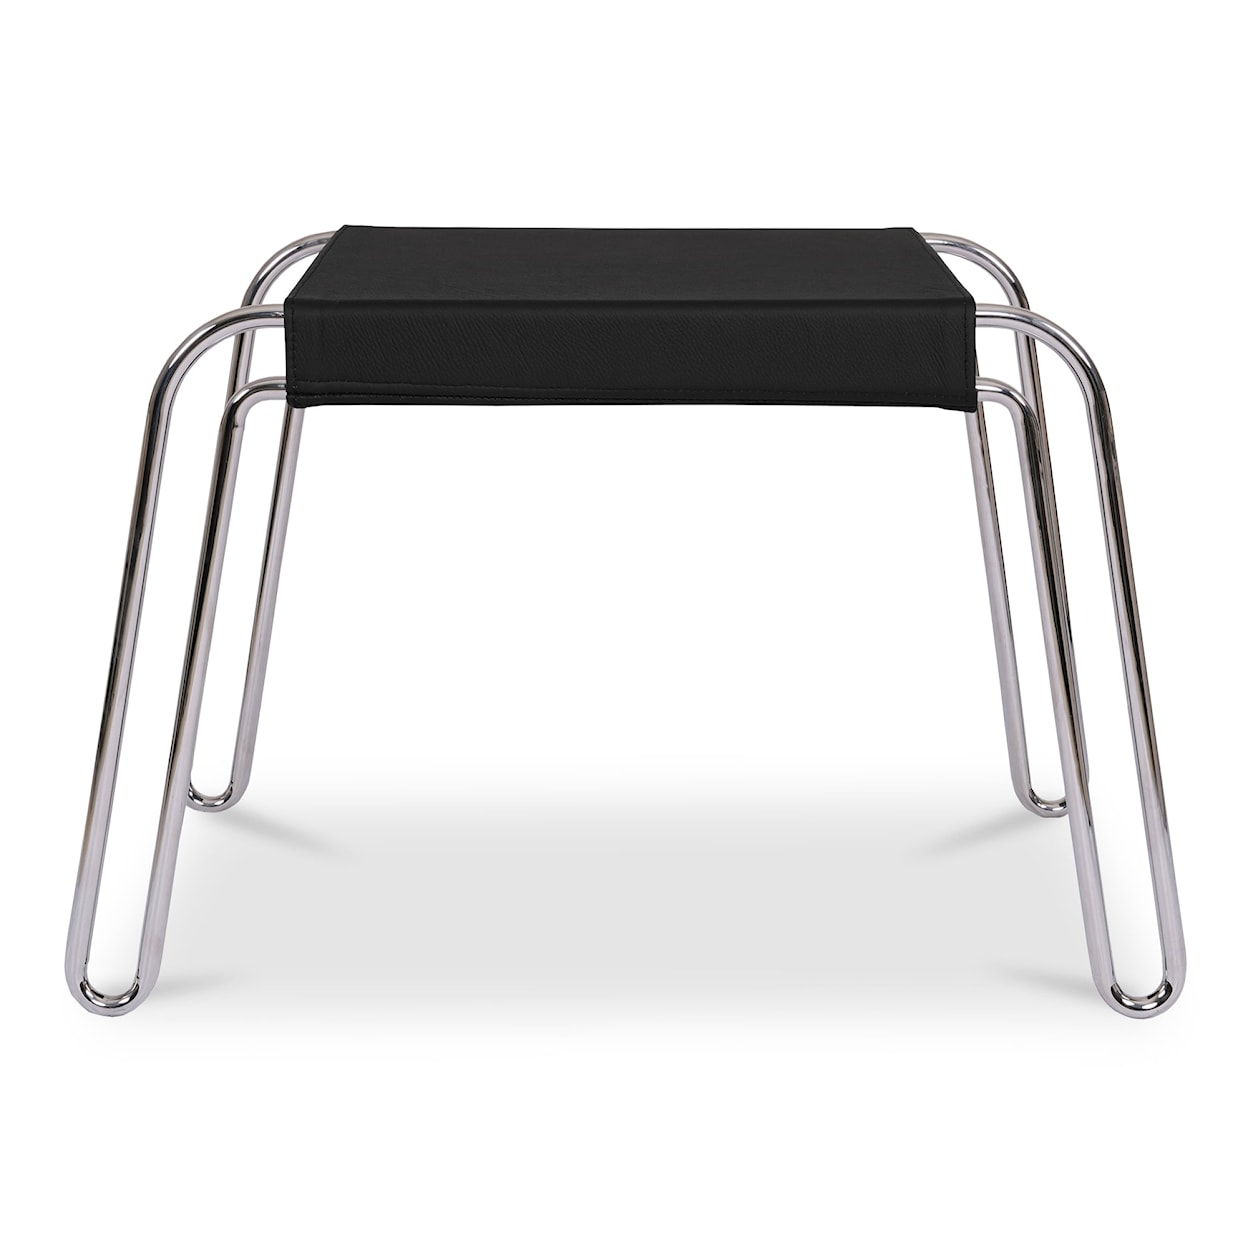 Moe's Home Collection Petra Leather Stool